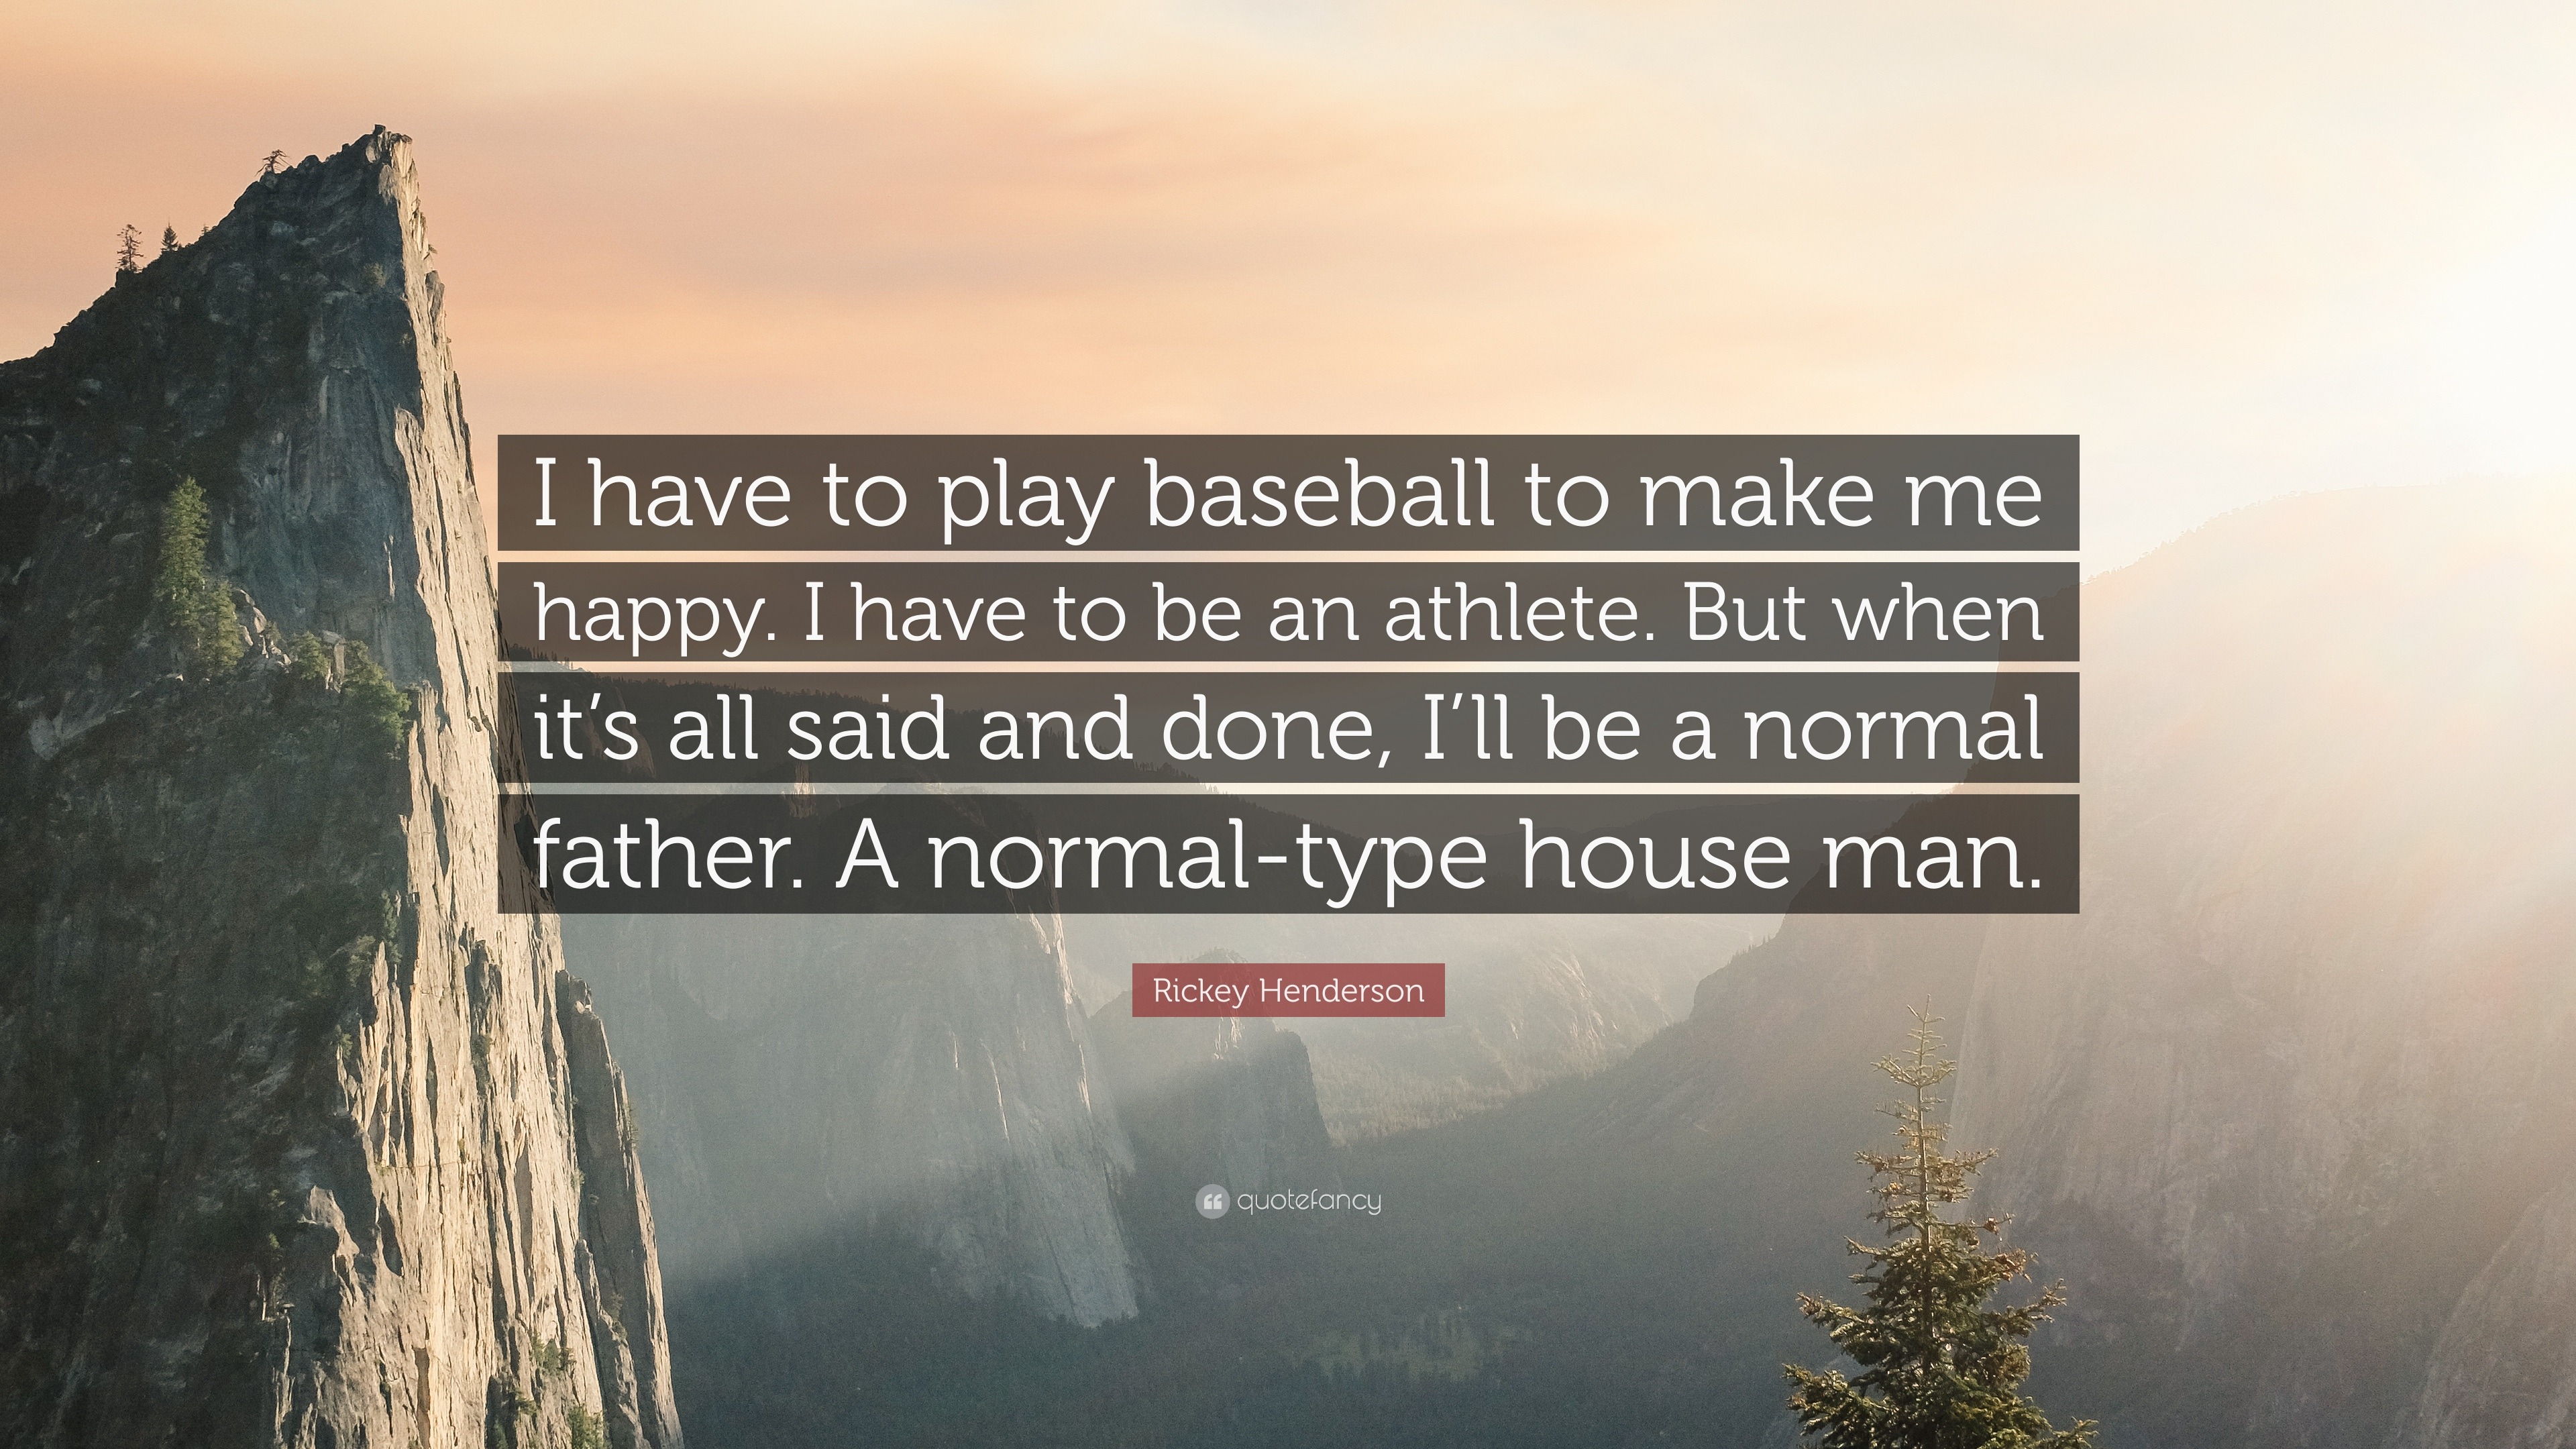 Rickey Henderson Quote: “I have to play baseball to make me happy